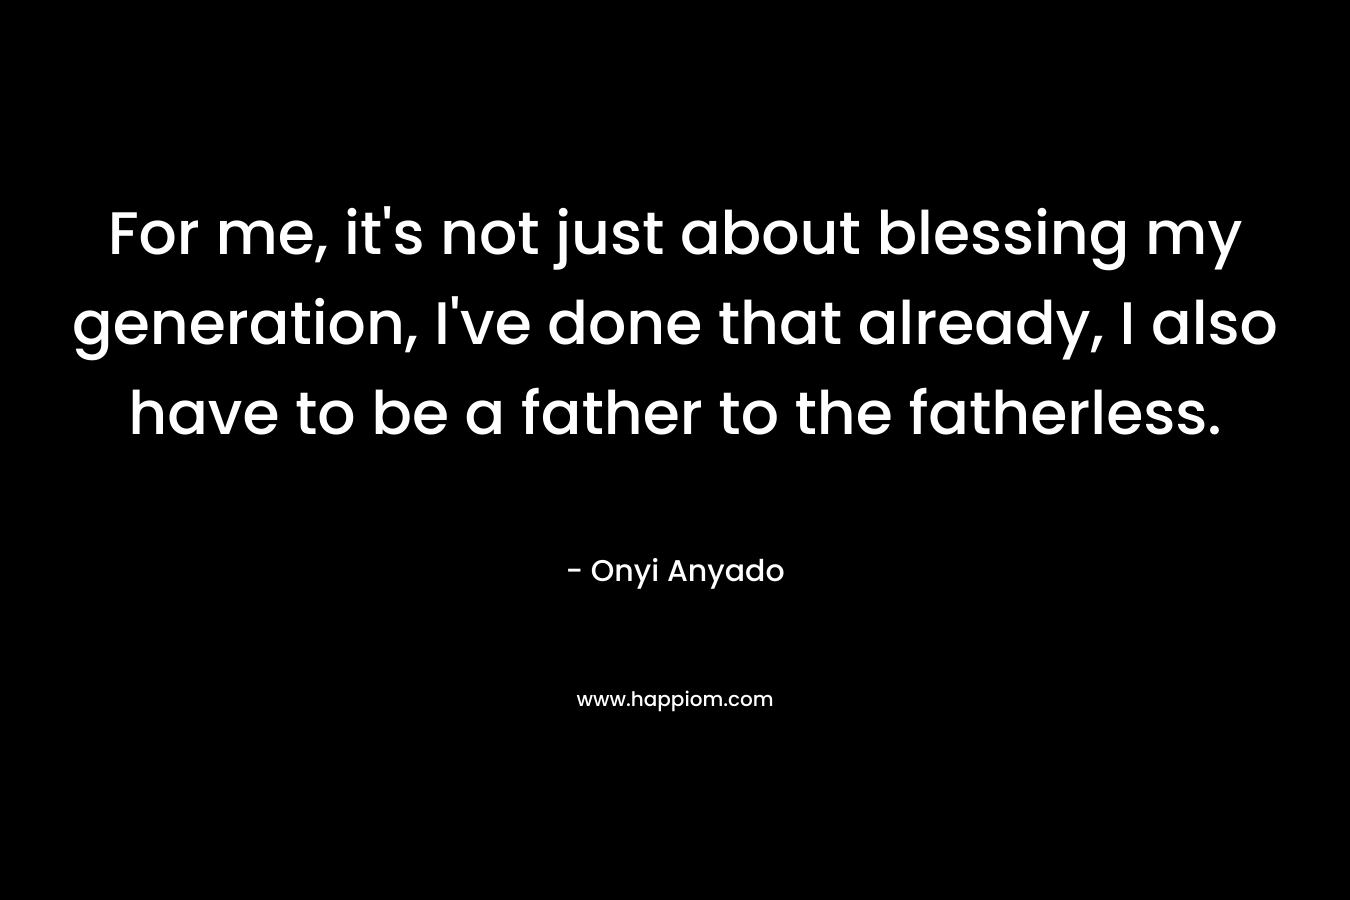 For me, it's not just about blessing my generation, I've done that already, I also have to be a father to the fatherless.